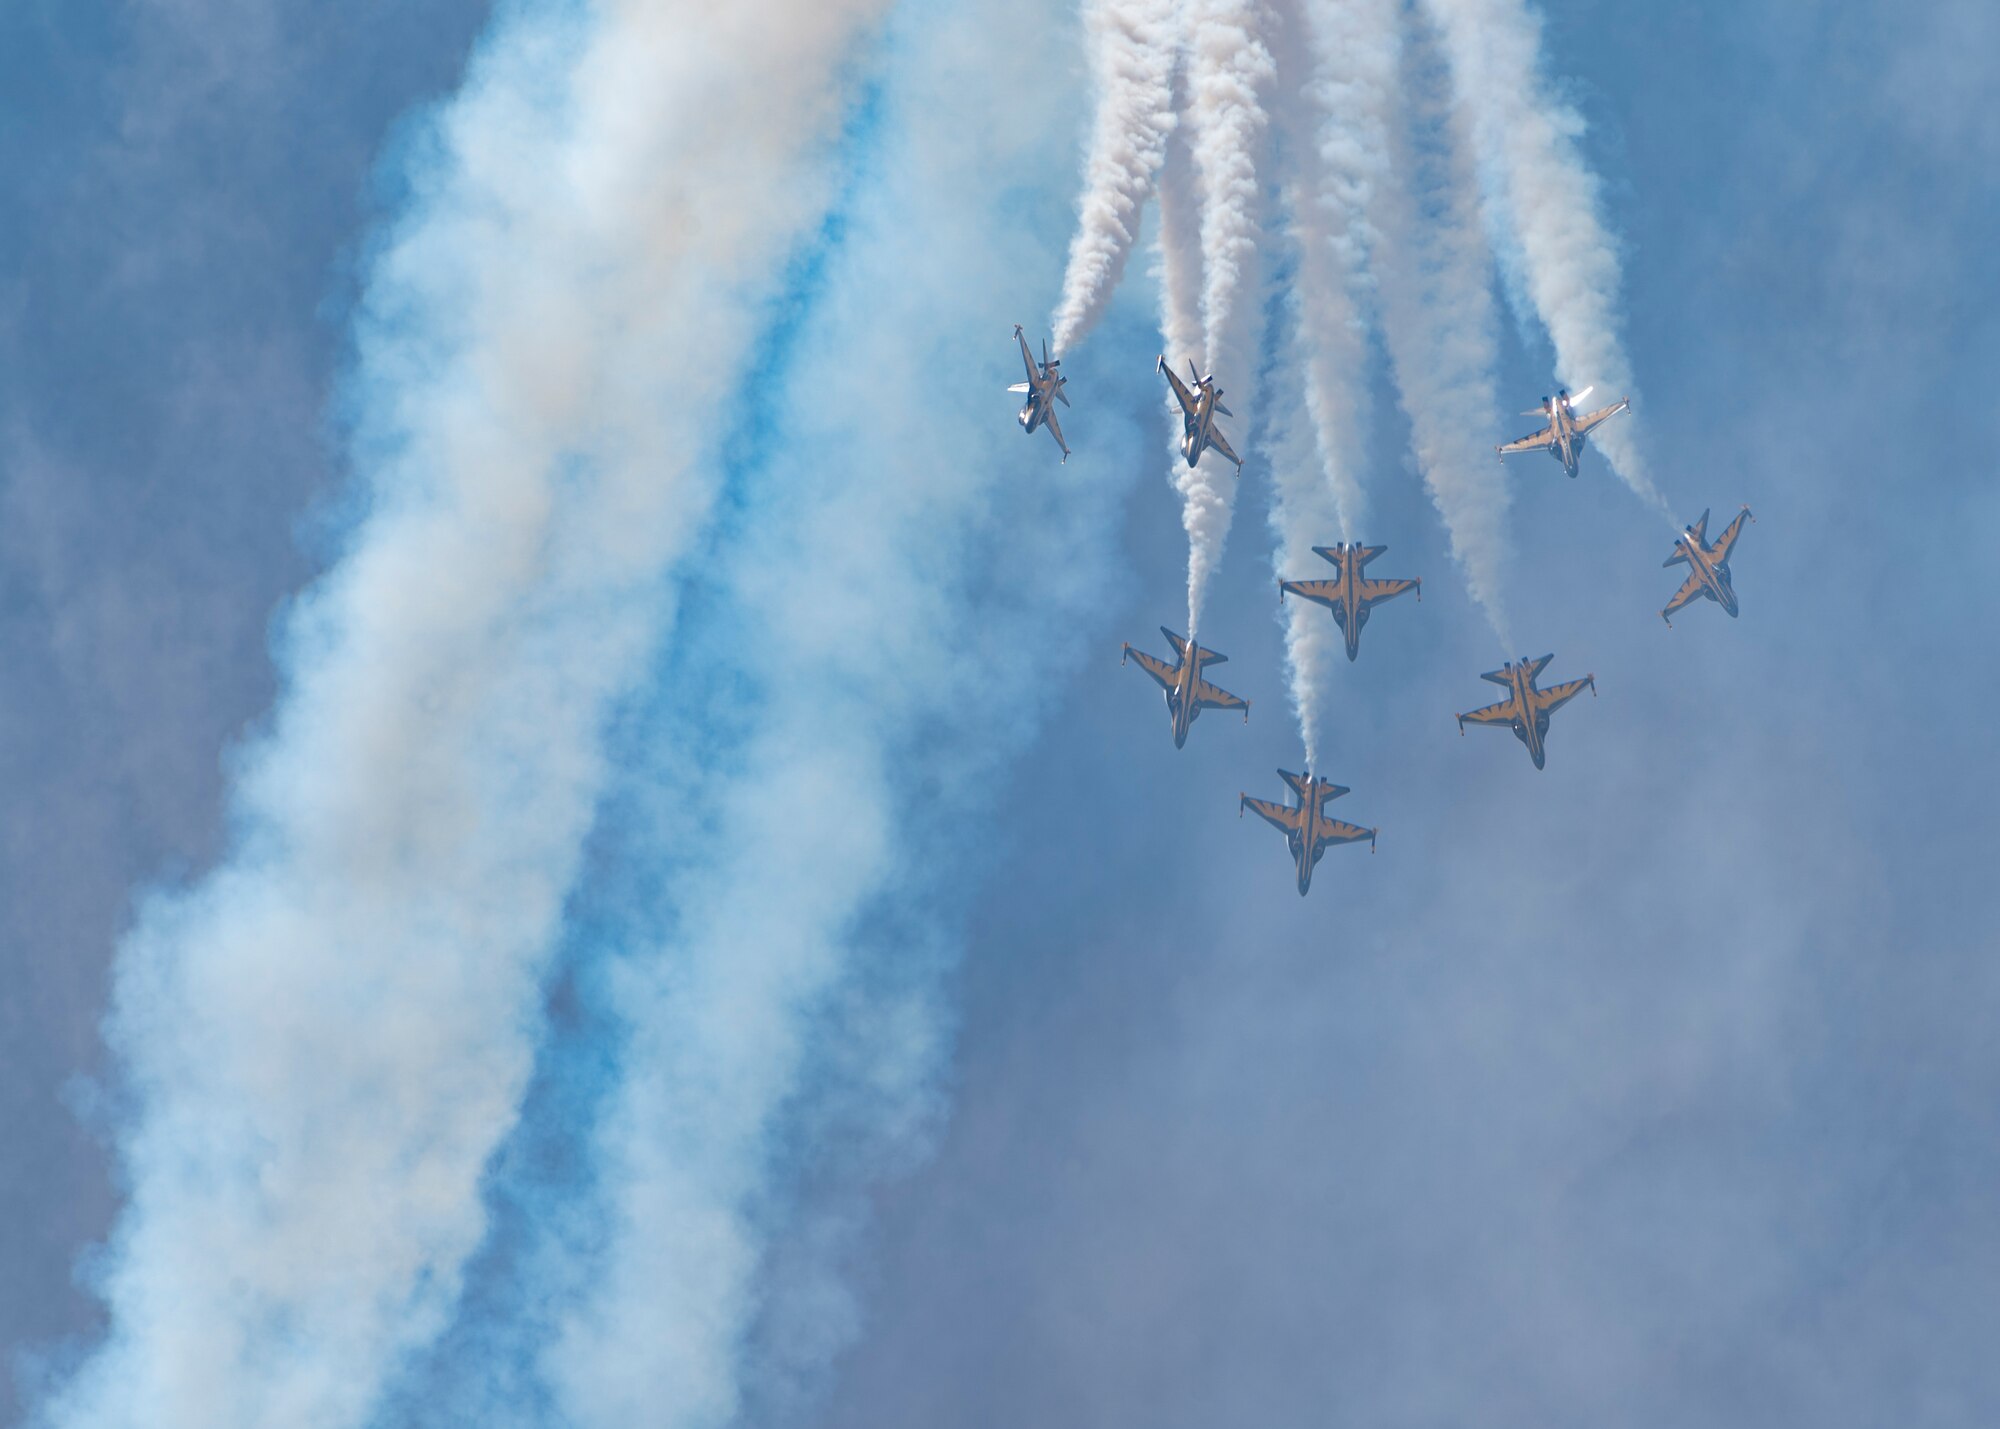 The Republic of Korea 53rd Air Demonstration Group, better known as the Black Eagles, perform aerial tricks in the sky.